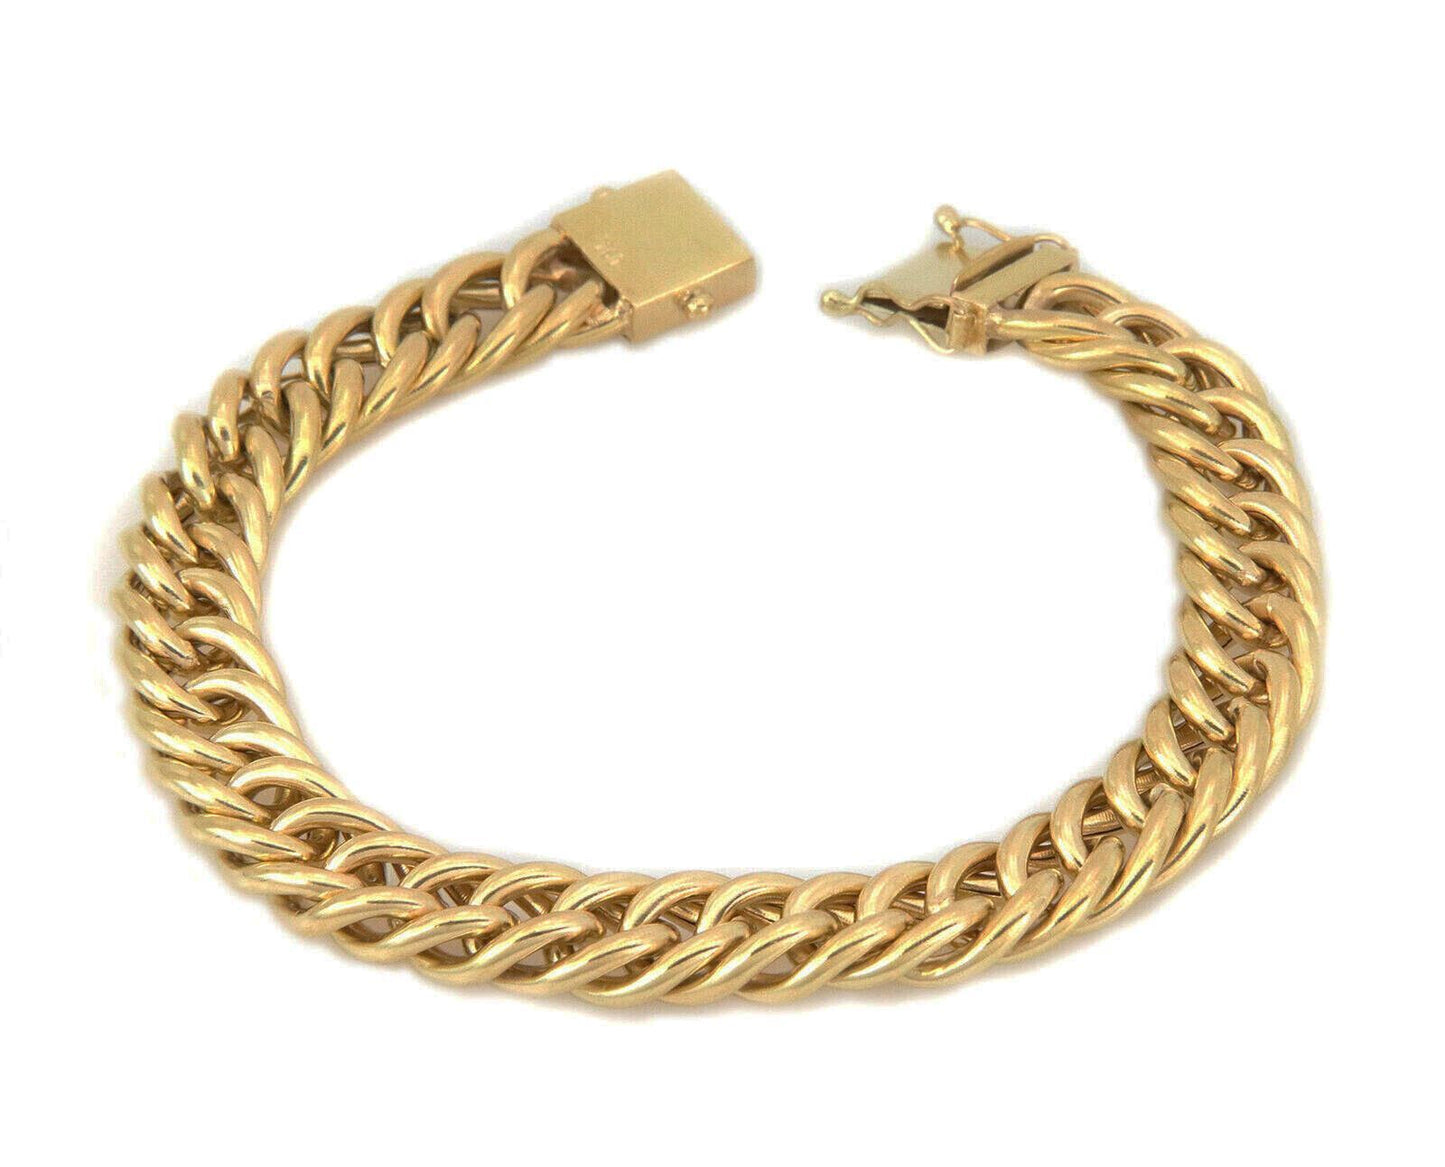 Puffed 18k Yellow Gold Curb Link Bracelet